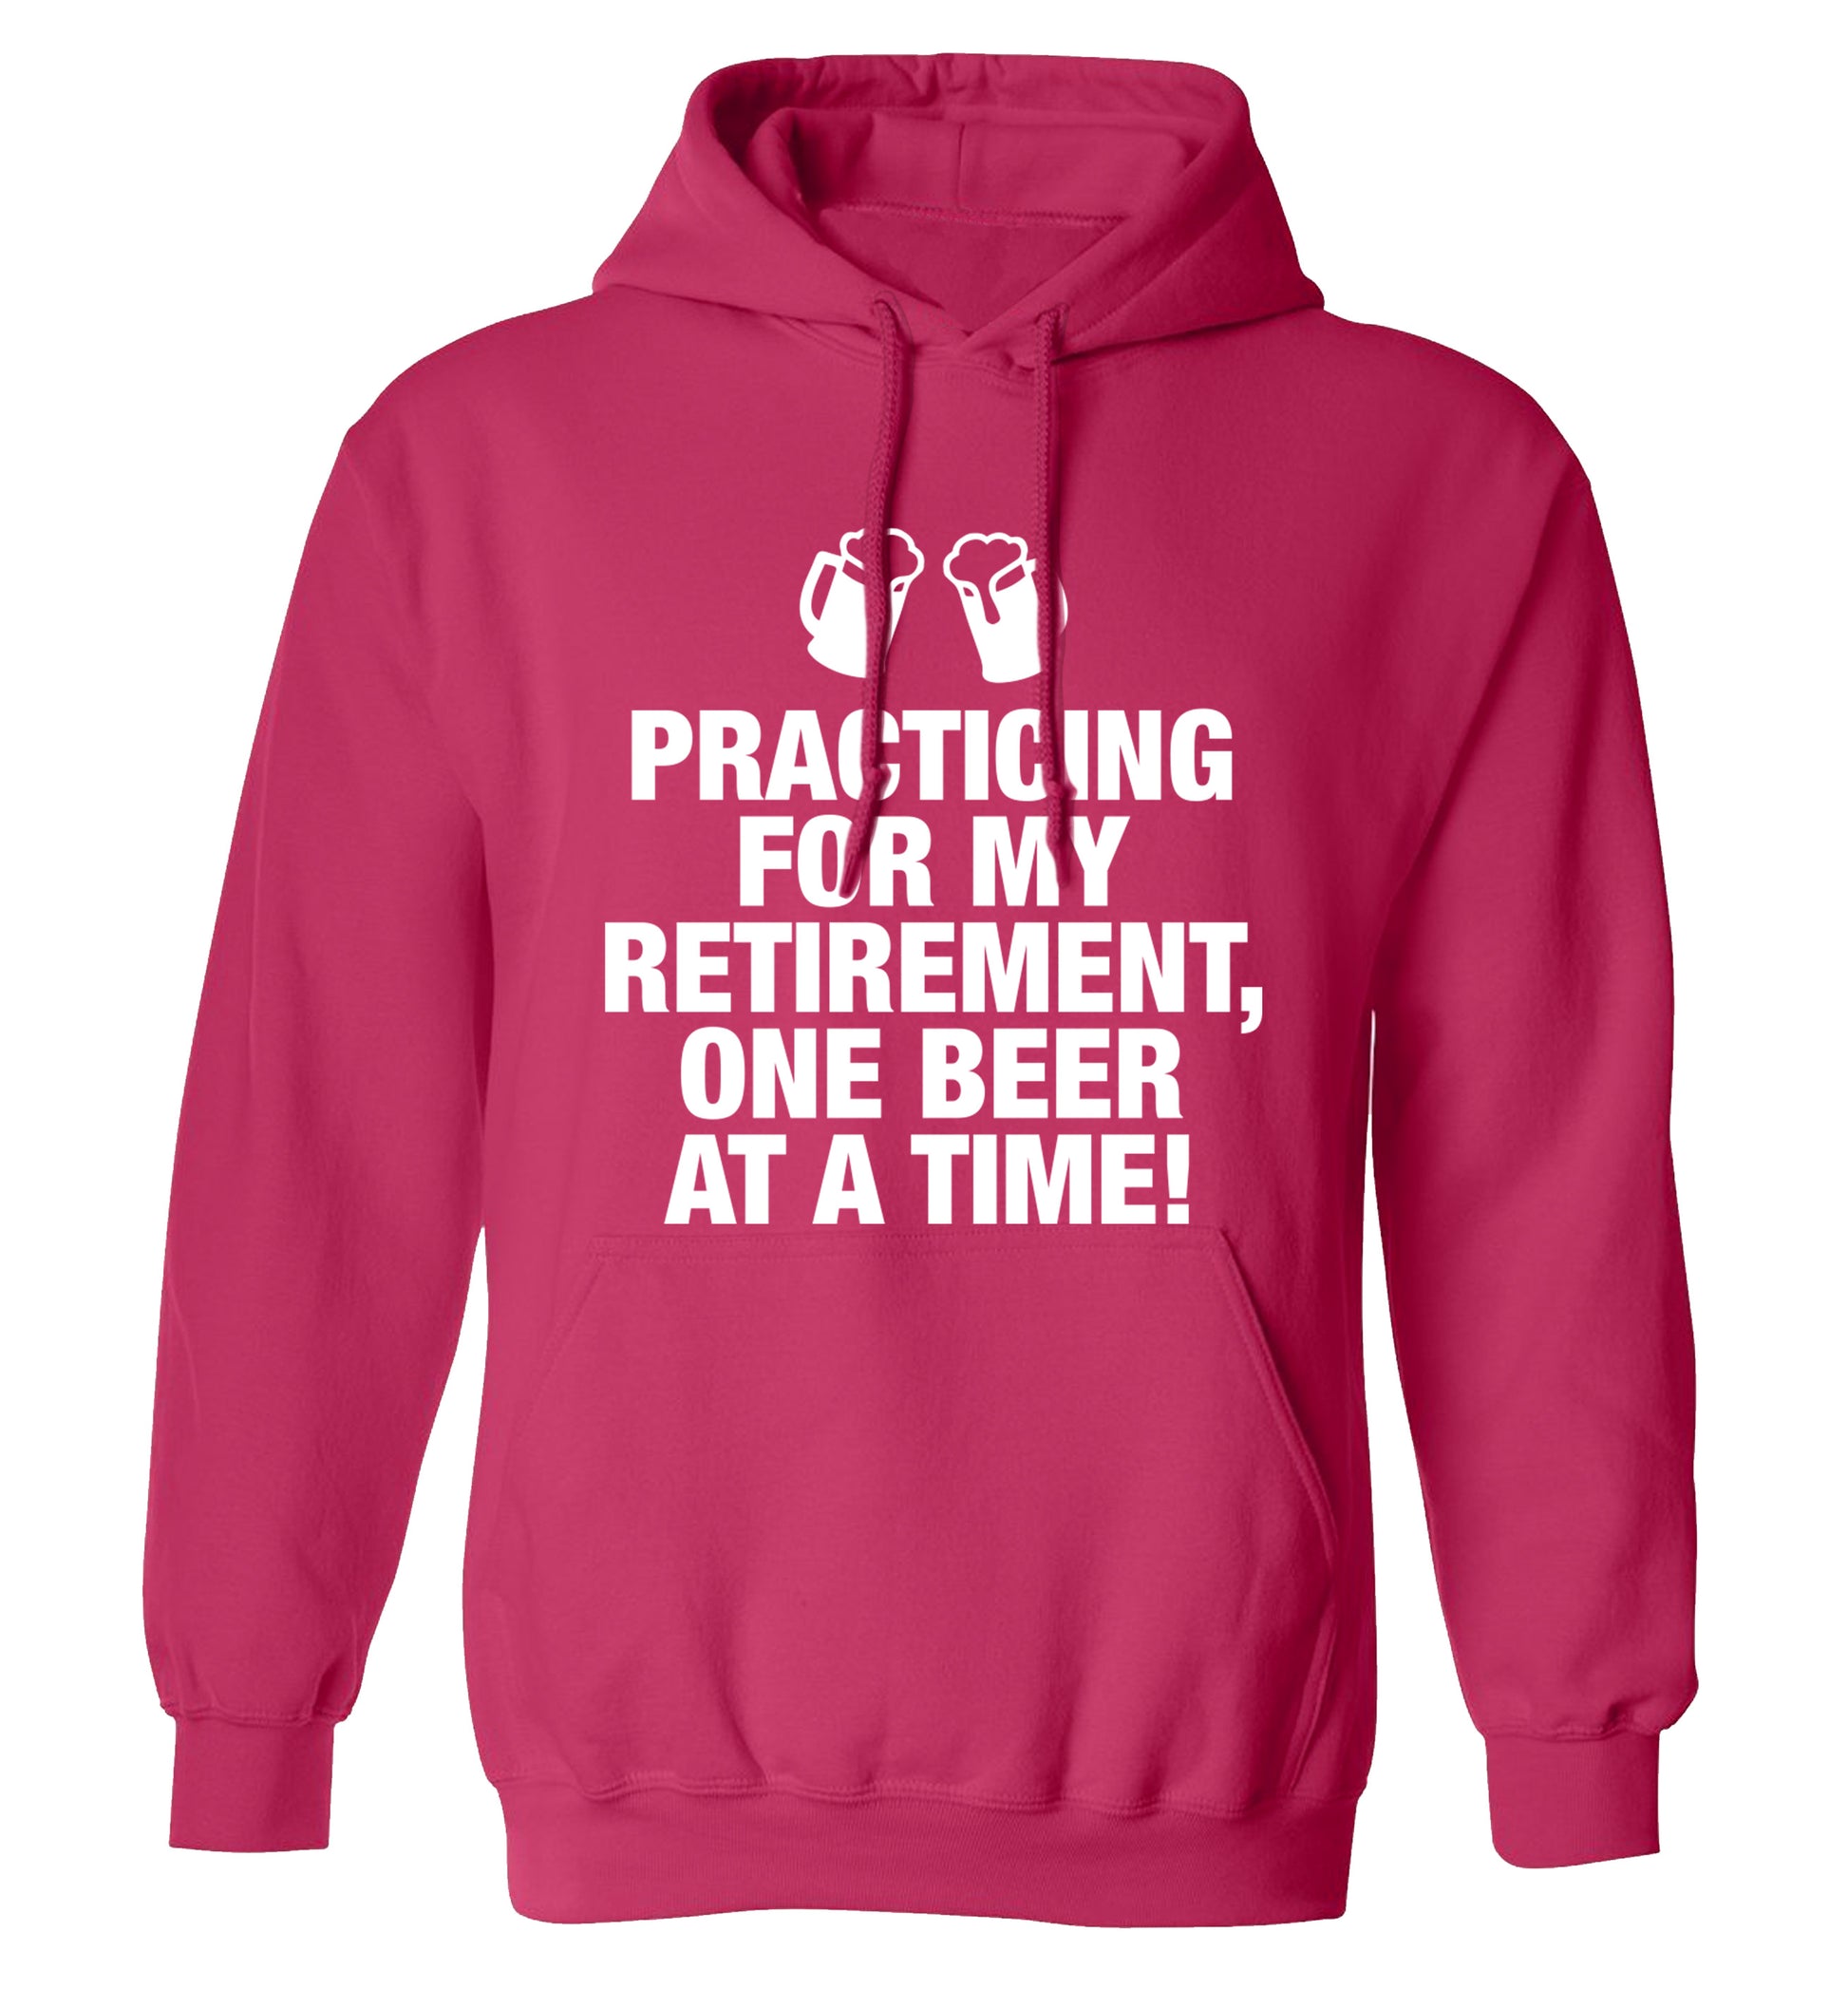 Practicing my retirement one beer at a time adults unisex pink hoodie 2XL